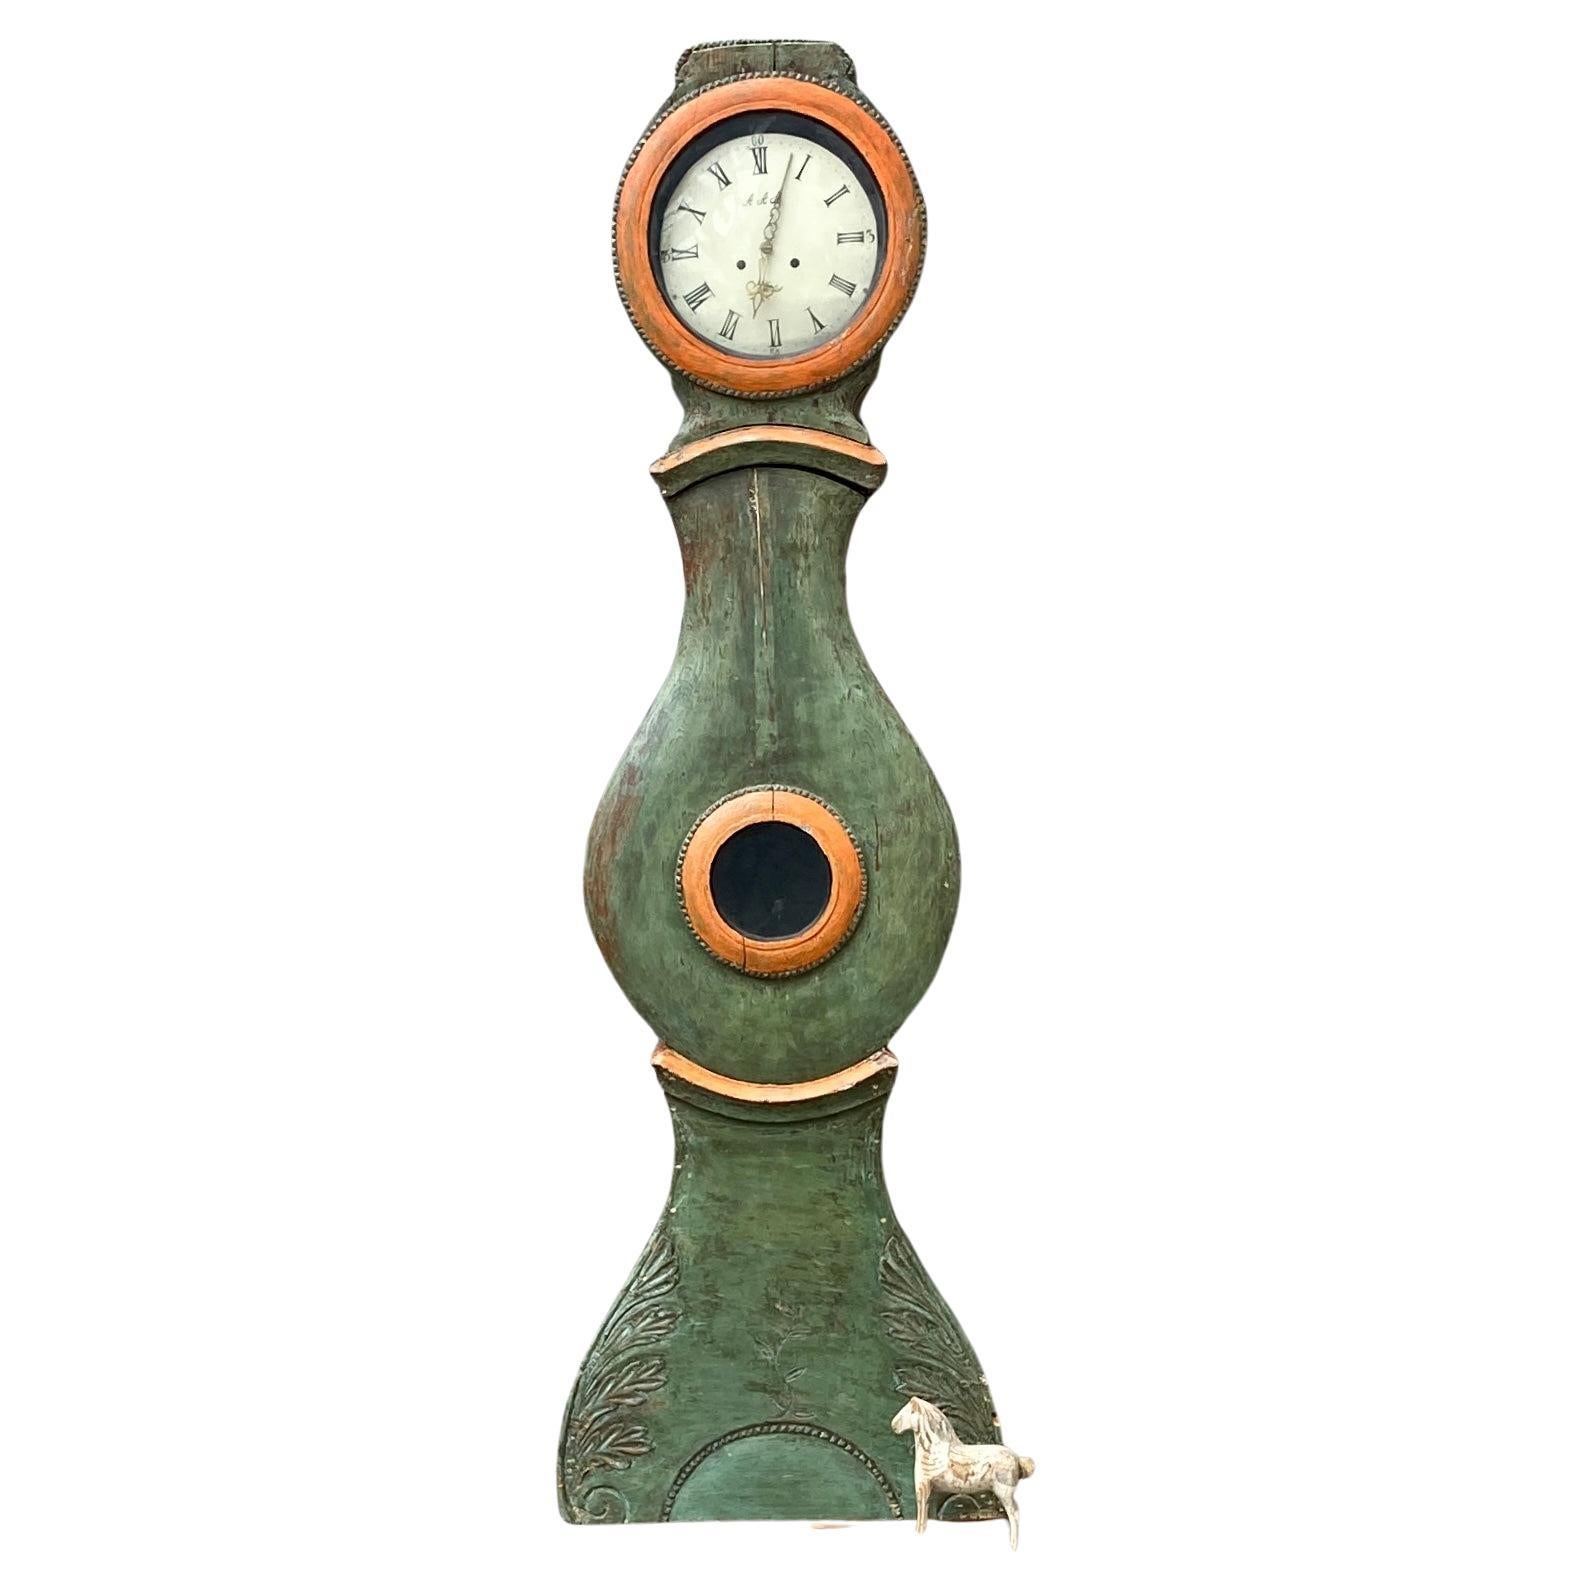 Swedish antique mora clock dating from early/ 1800s featuring green paint with orange details that is painted on the body. 
The clockwork is sold 'as is' and should be considered as a decorative piece only even though the original mechanism and